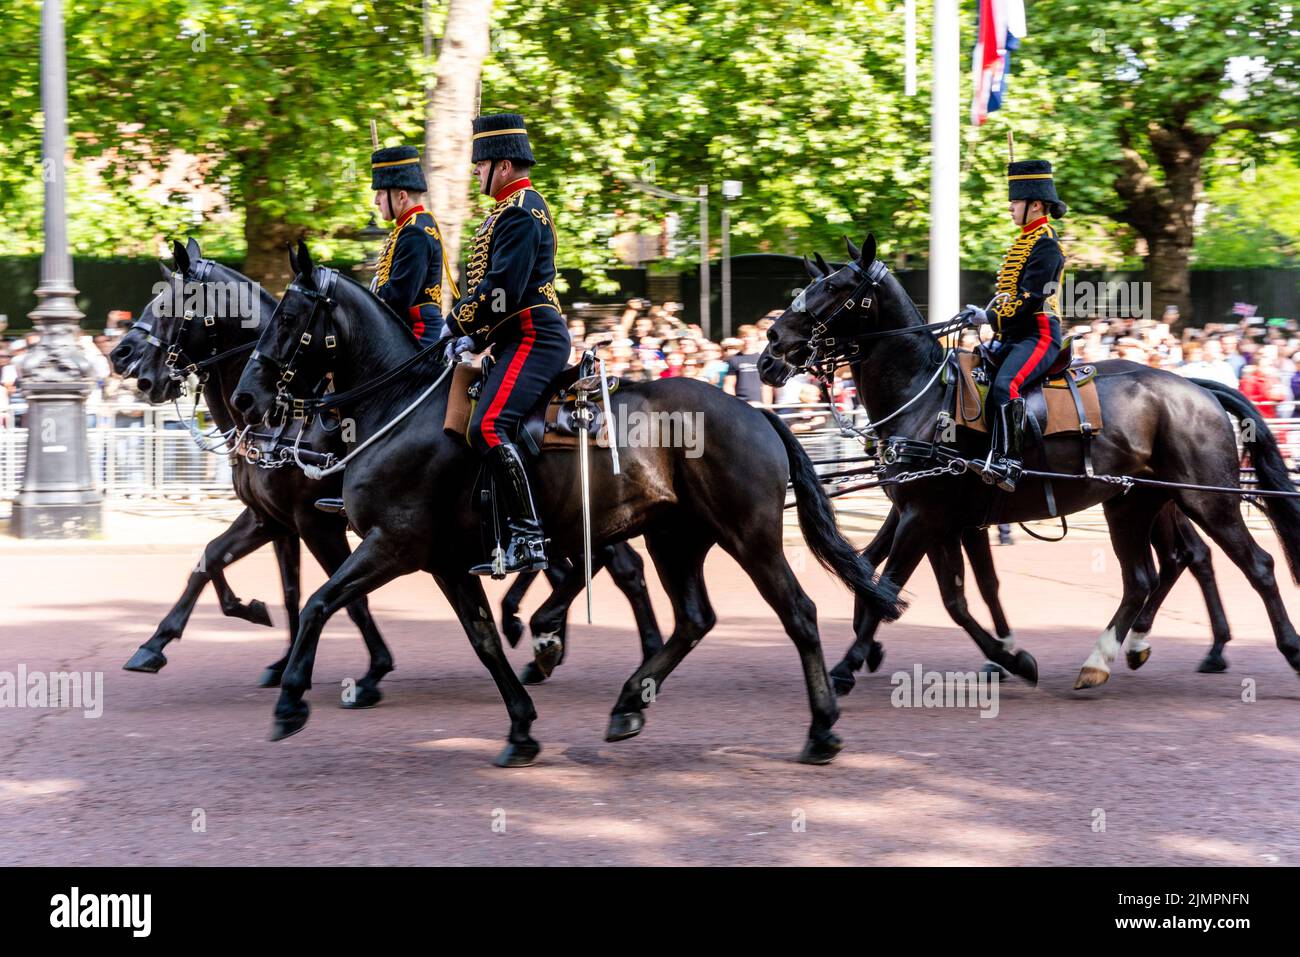 A Group Of Mounted Soldiers Take Part In The Queen's Birthday Parade During The Queen's Platinum Jubilee Celebrations, The Mall, London, UK. Stock Photo